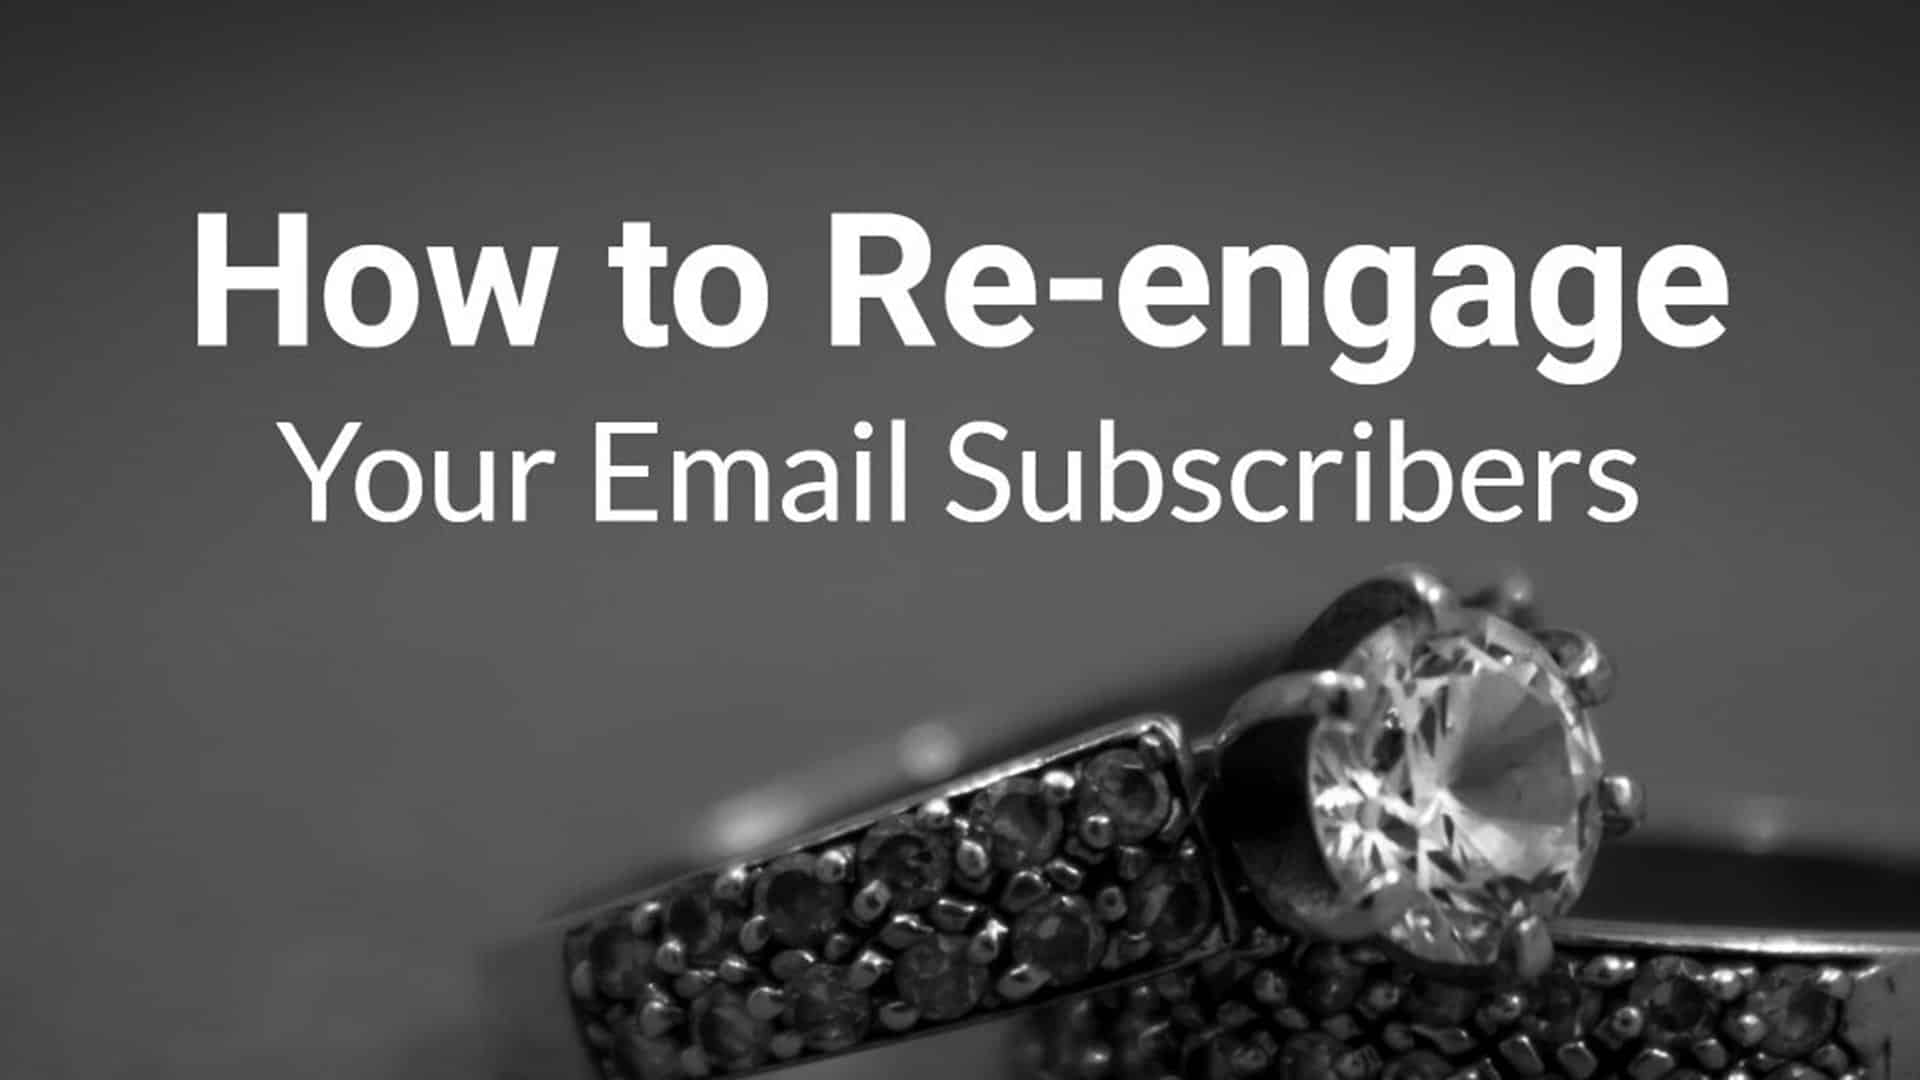 How to re-engage email subscribers